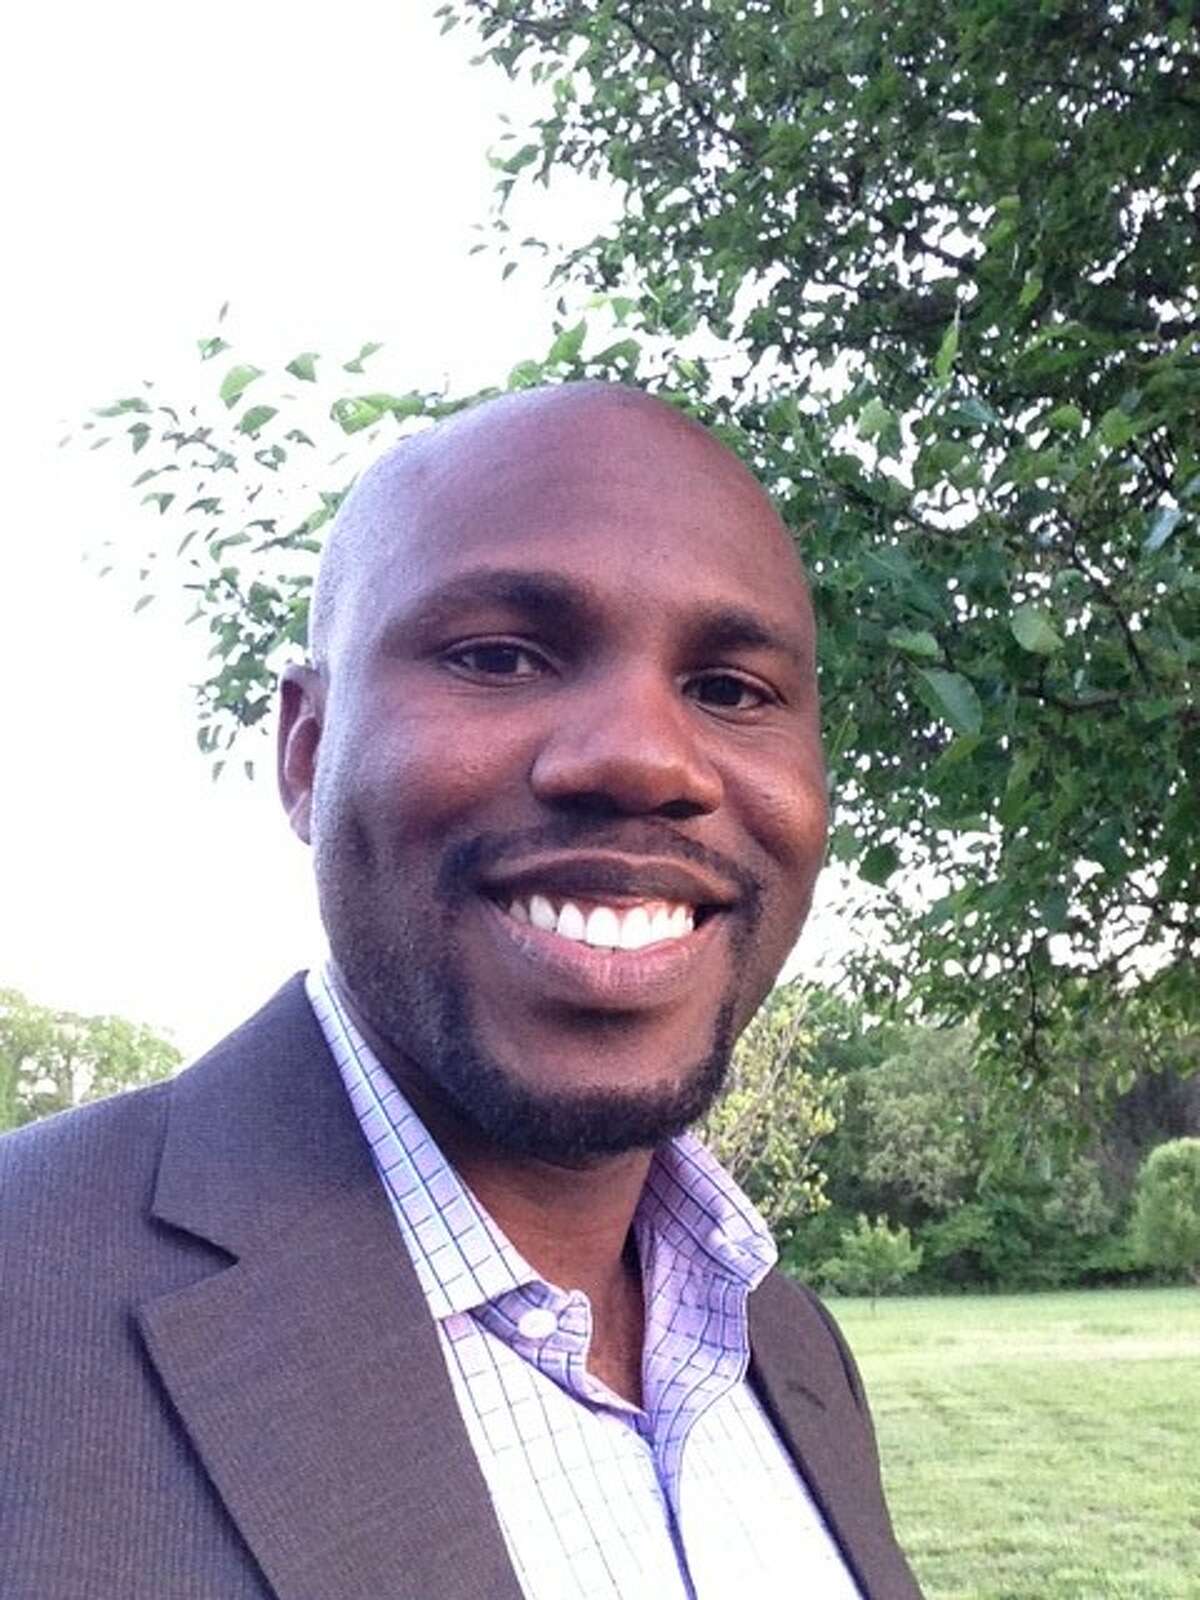 Jimi Amos, 33, is running for mayor of Pearland.